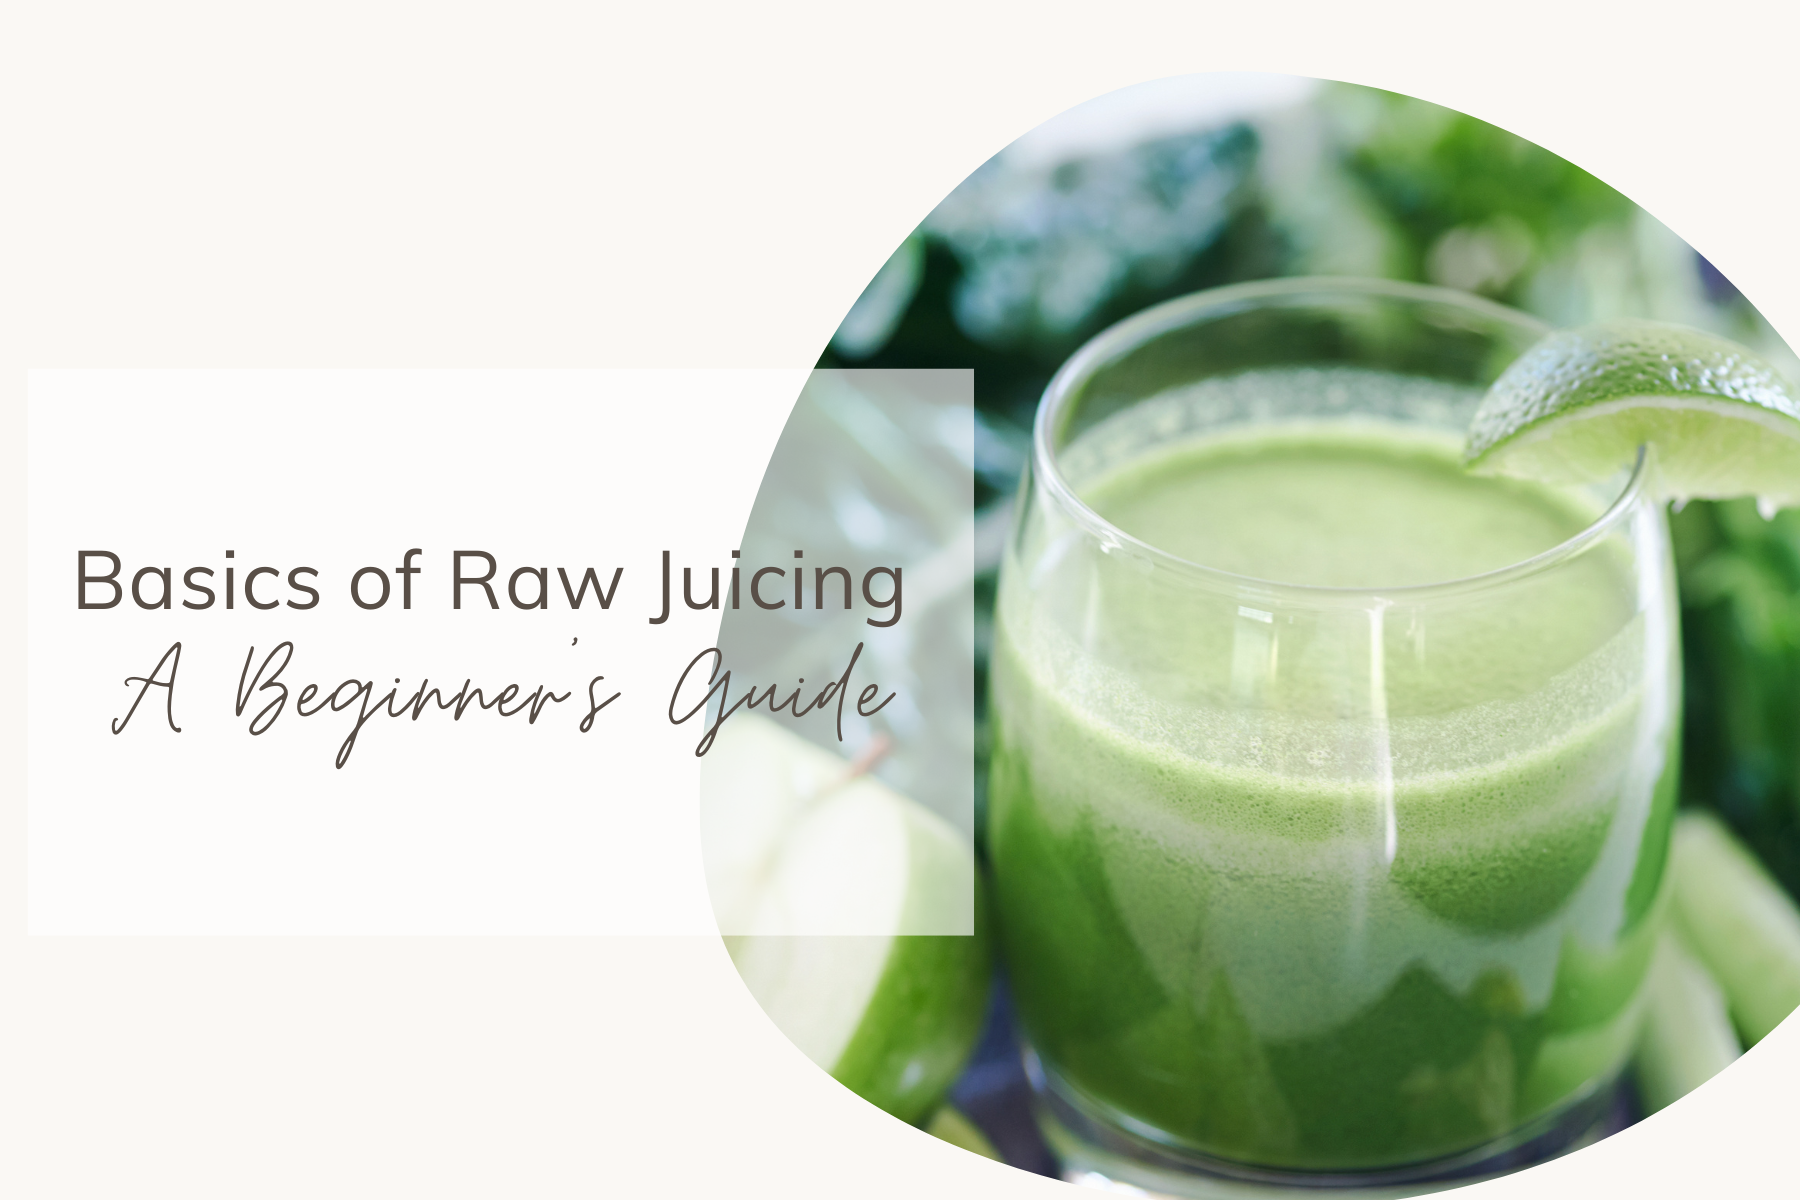 Basics of Raw Juicing - A Beginner's Guide